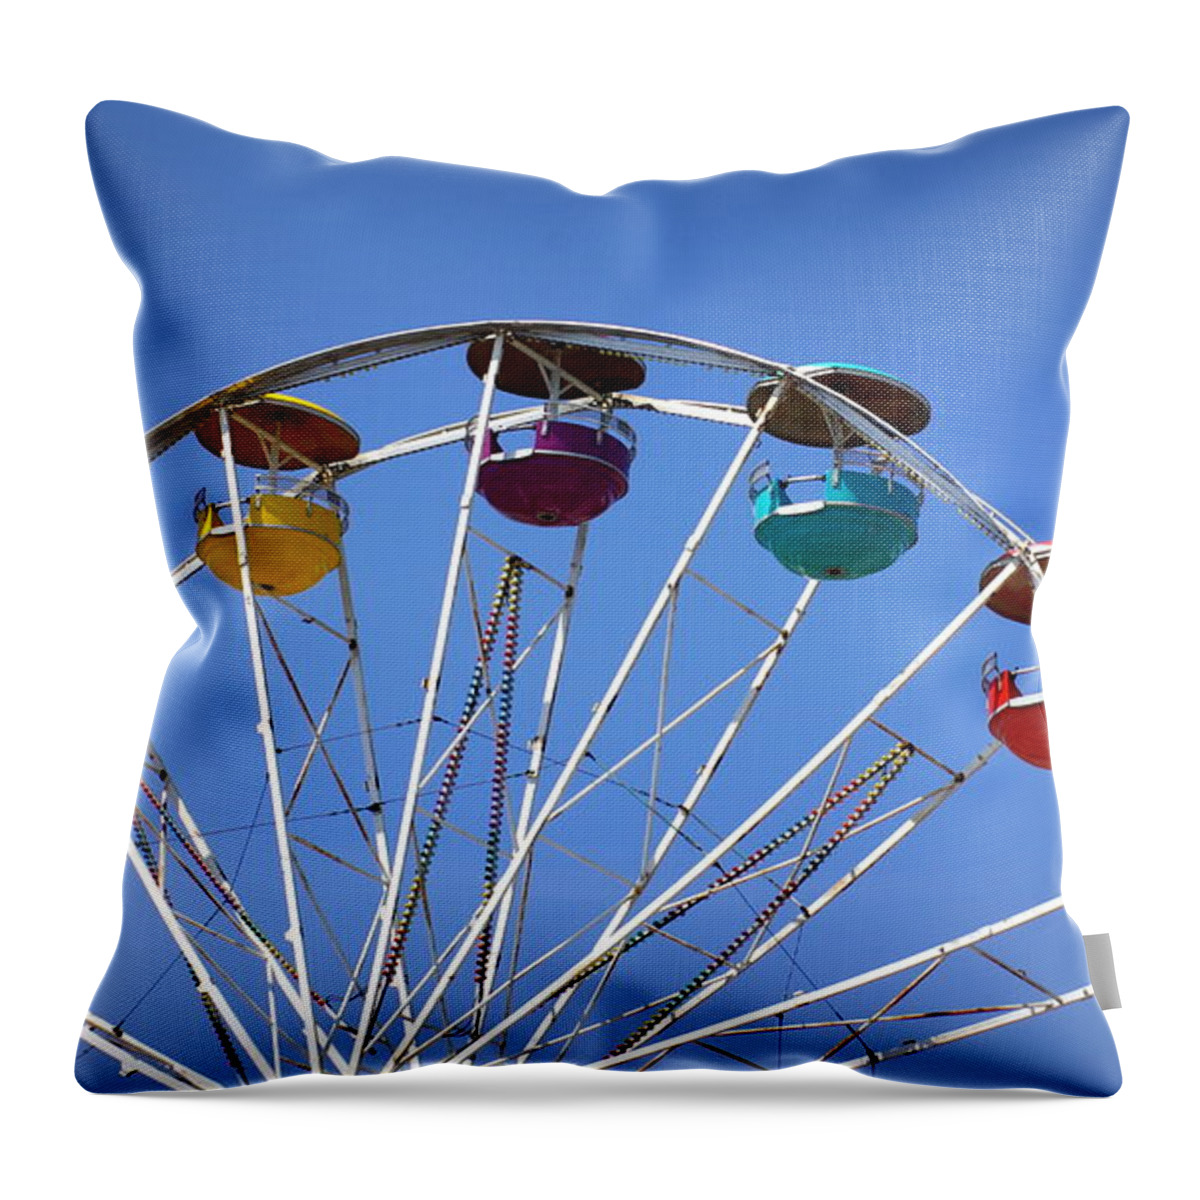 Ferris Wheel Throw Pillow featuring the photograph On A Clear Day by Linda Mishler